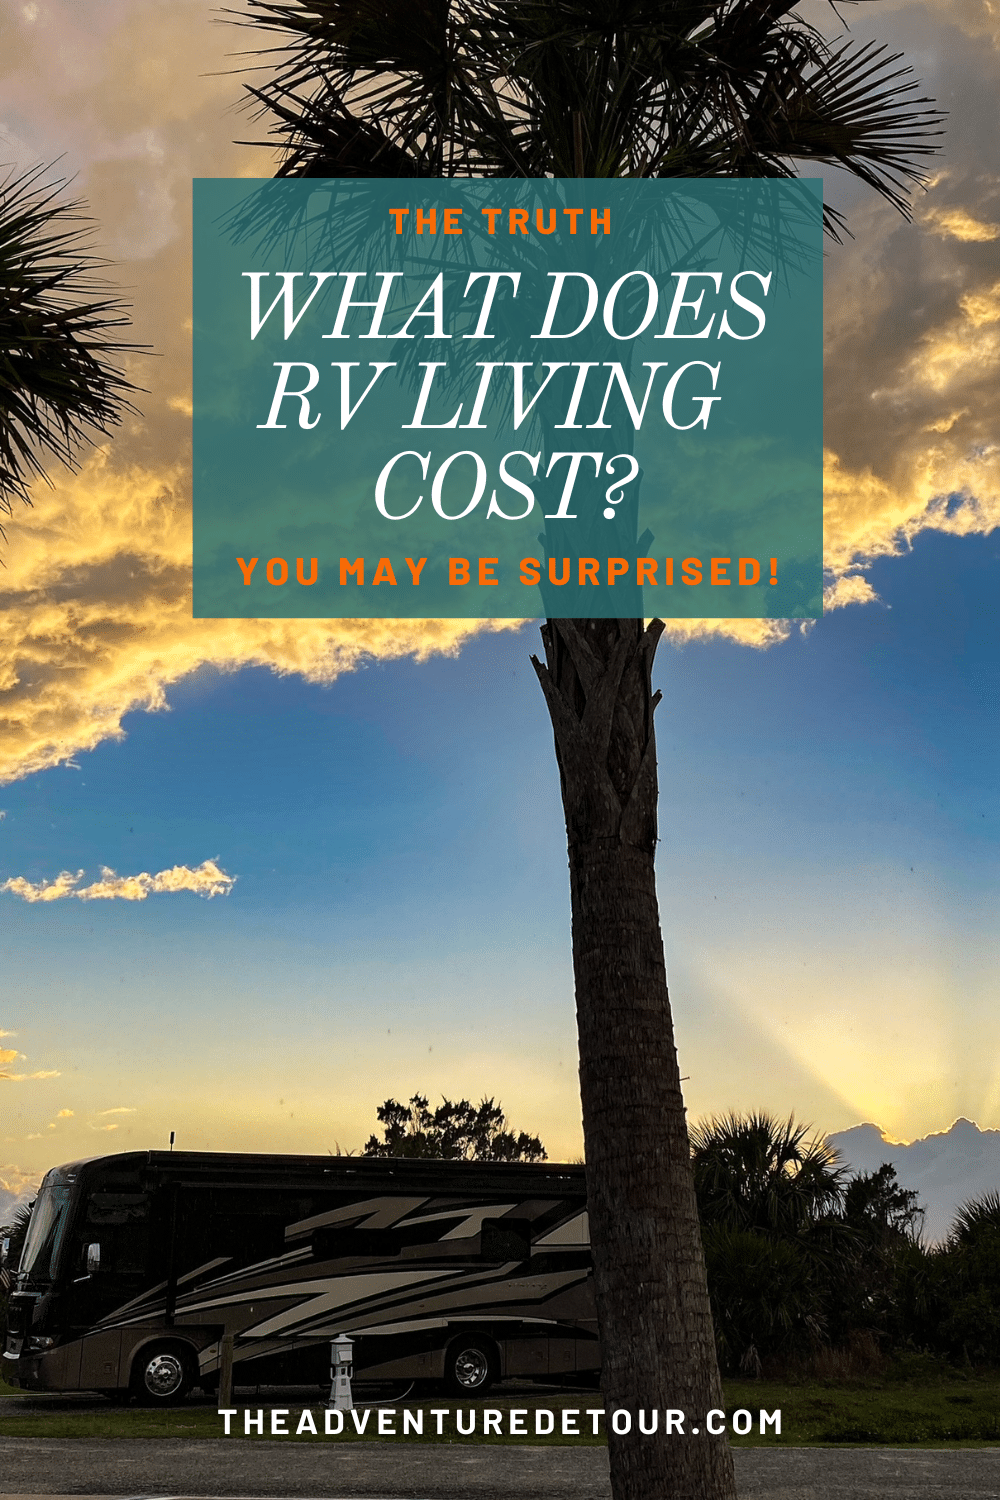 Sunset behind RV - RV living full time costs